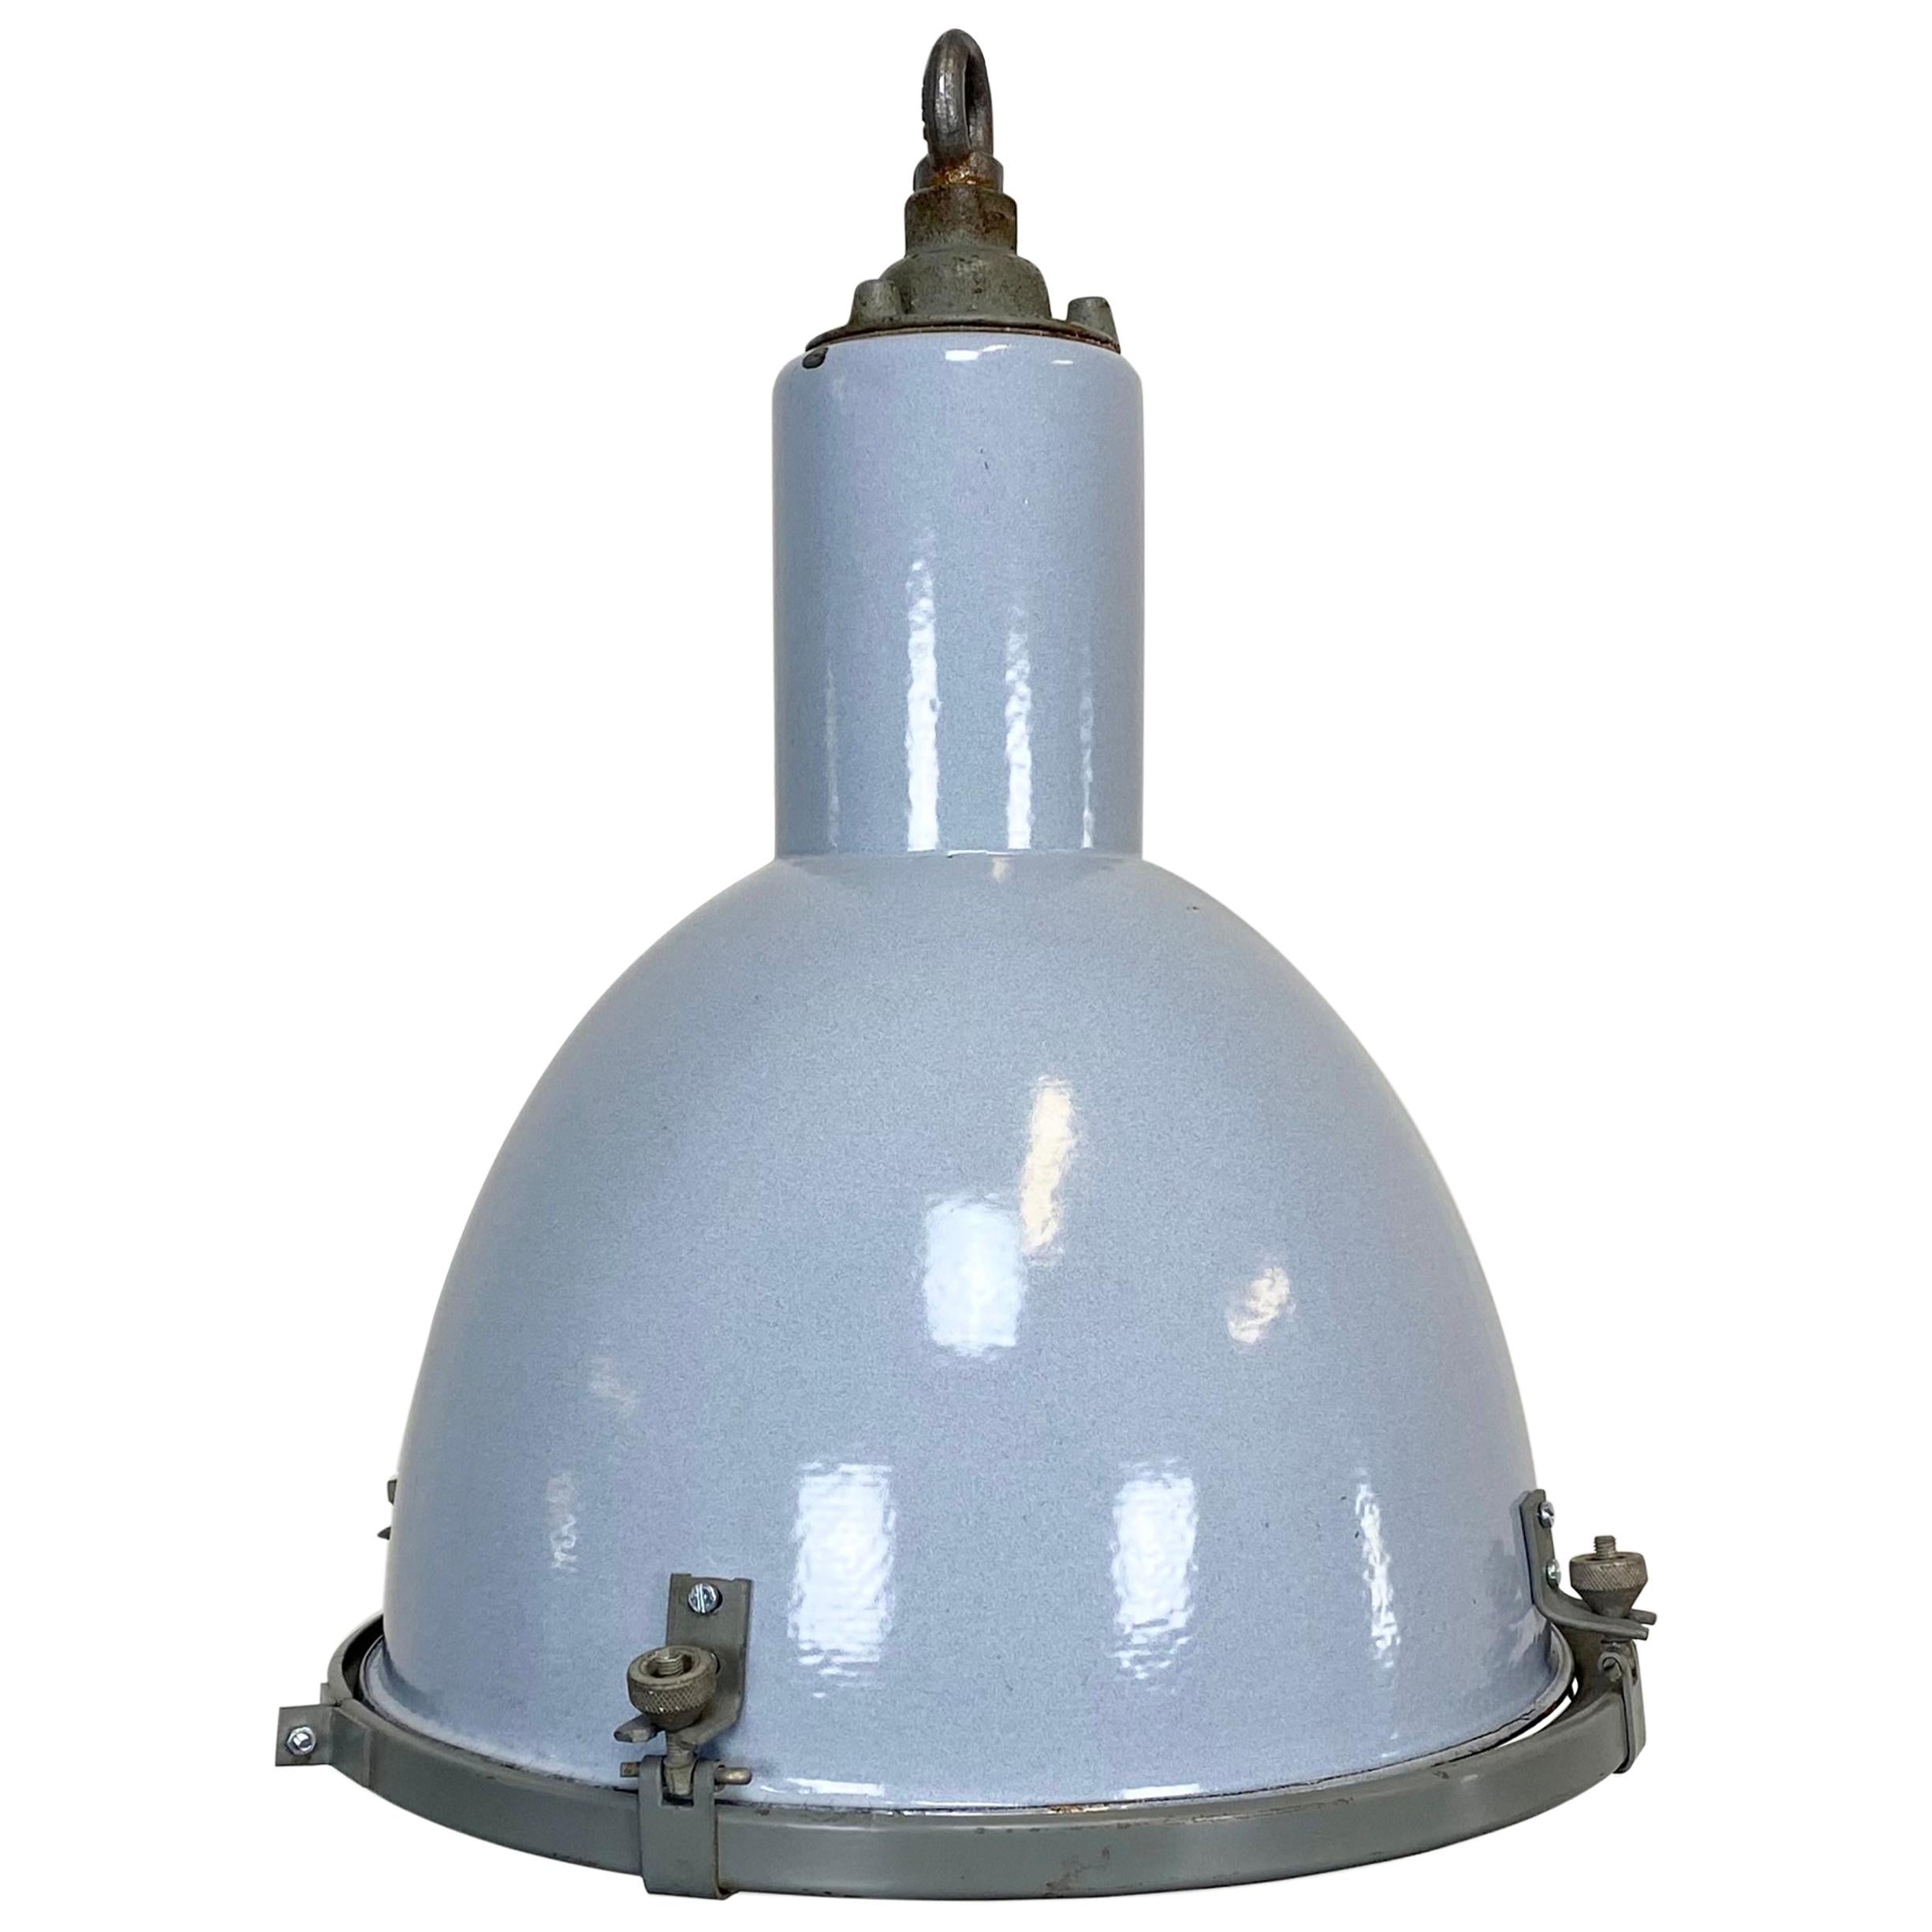 Vintage Grey Enamel Industrial Lamp with Glass Cover